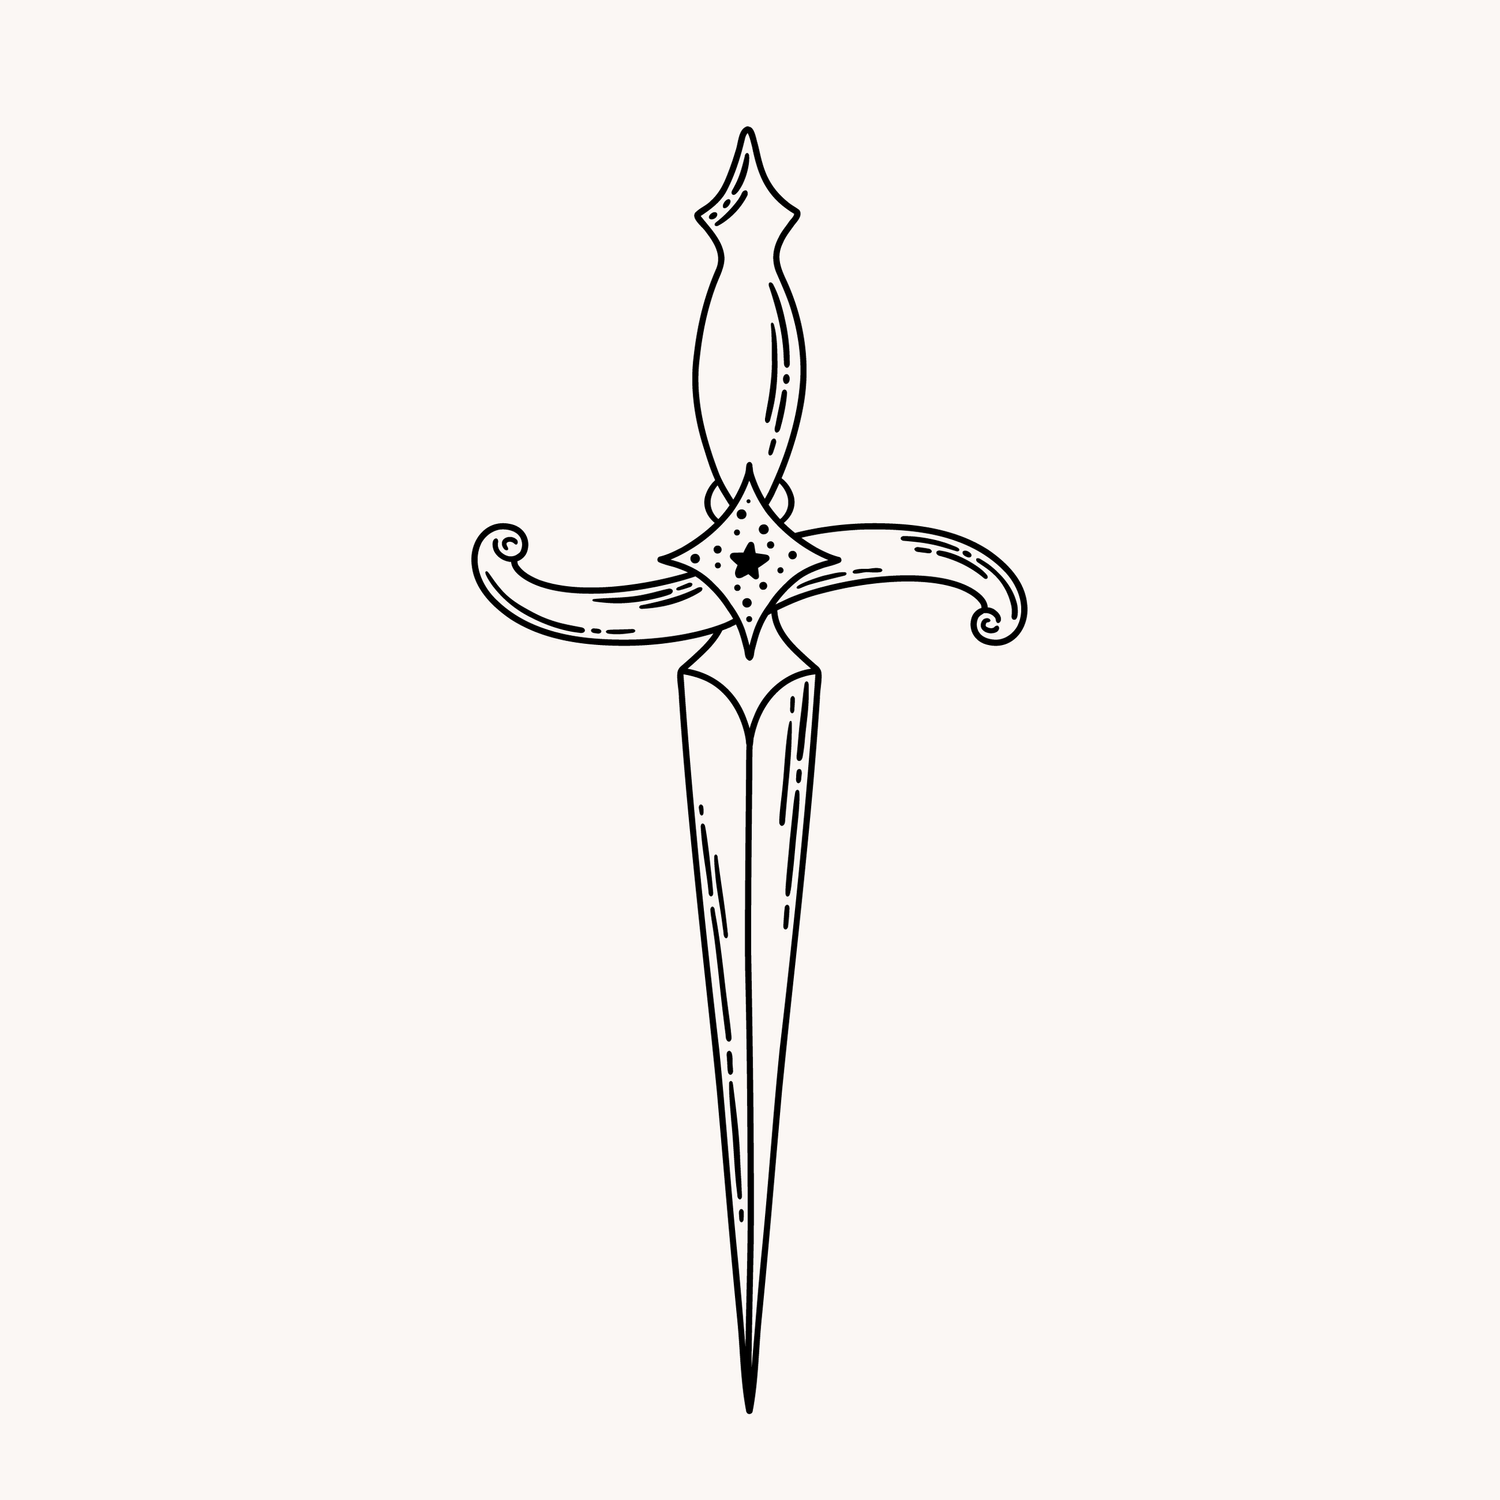 Dagger+-+Small+Black+PNG.png